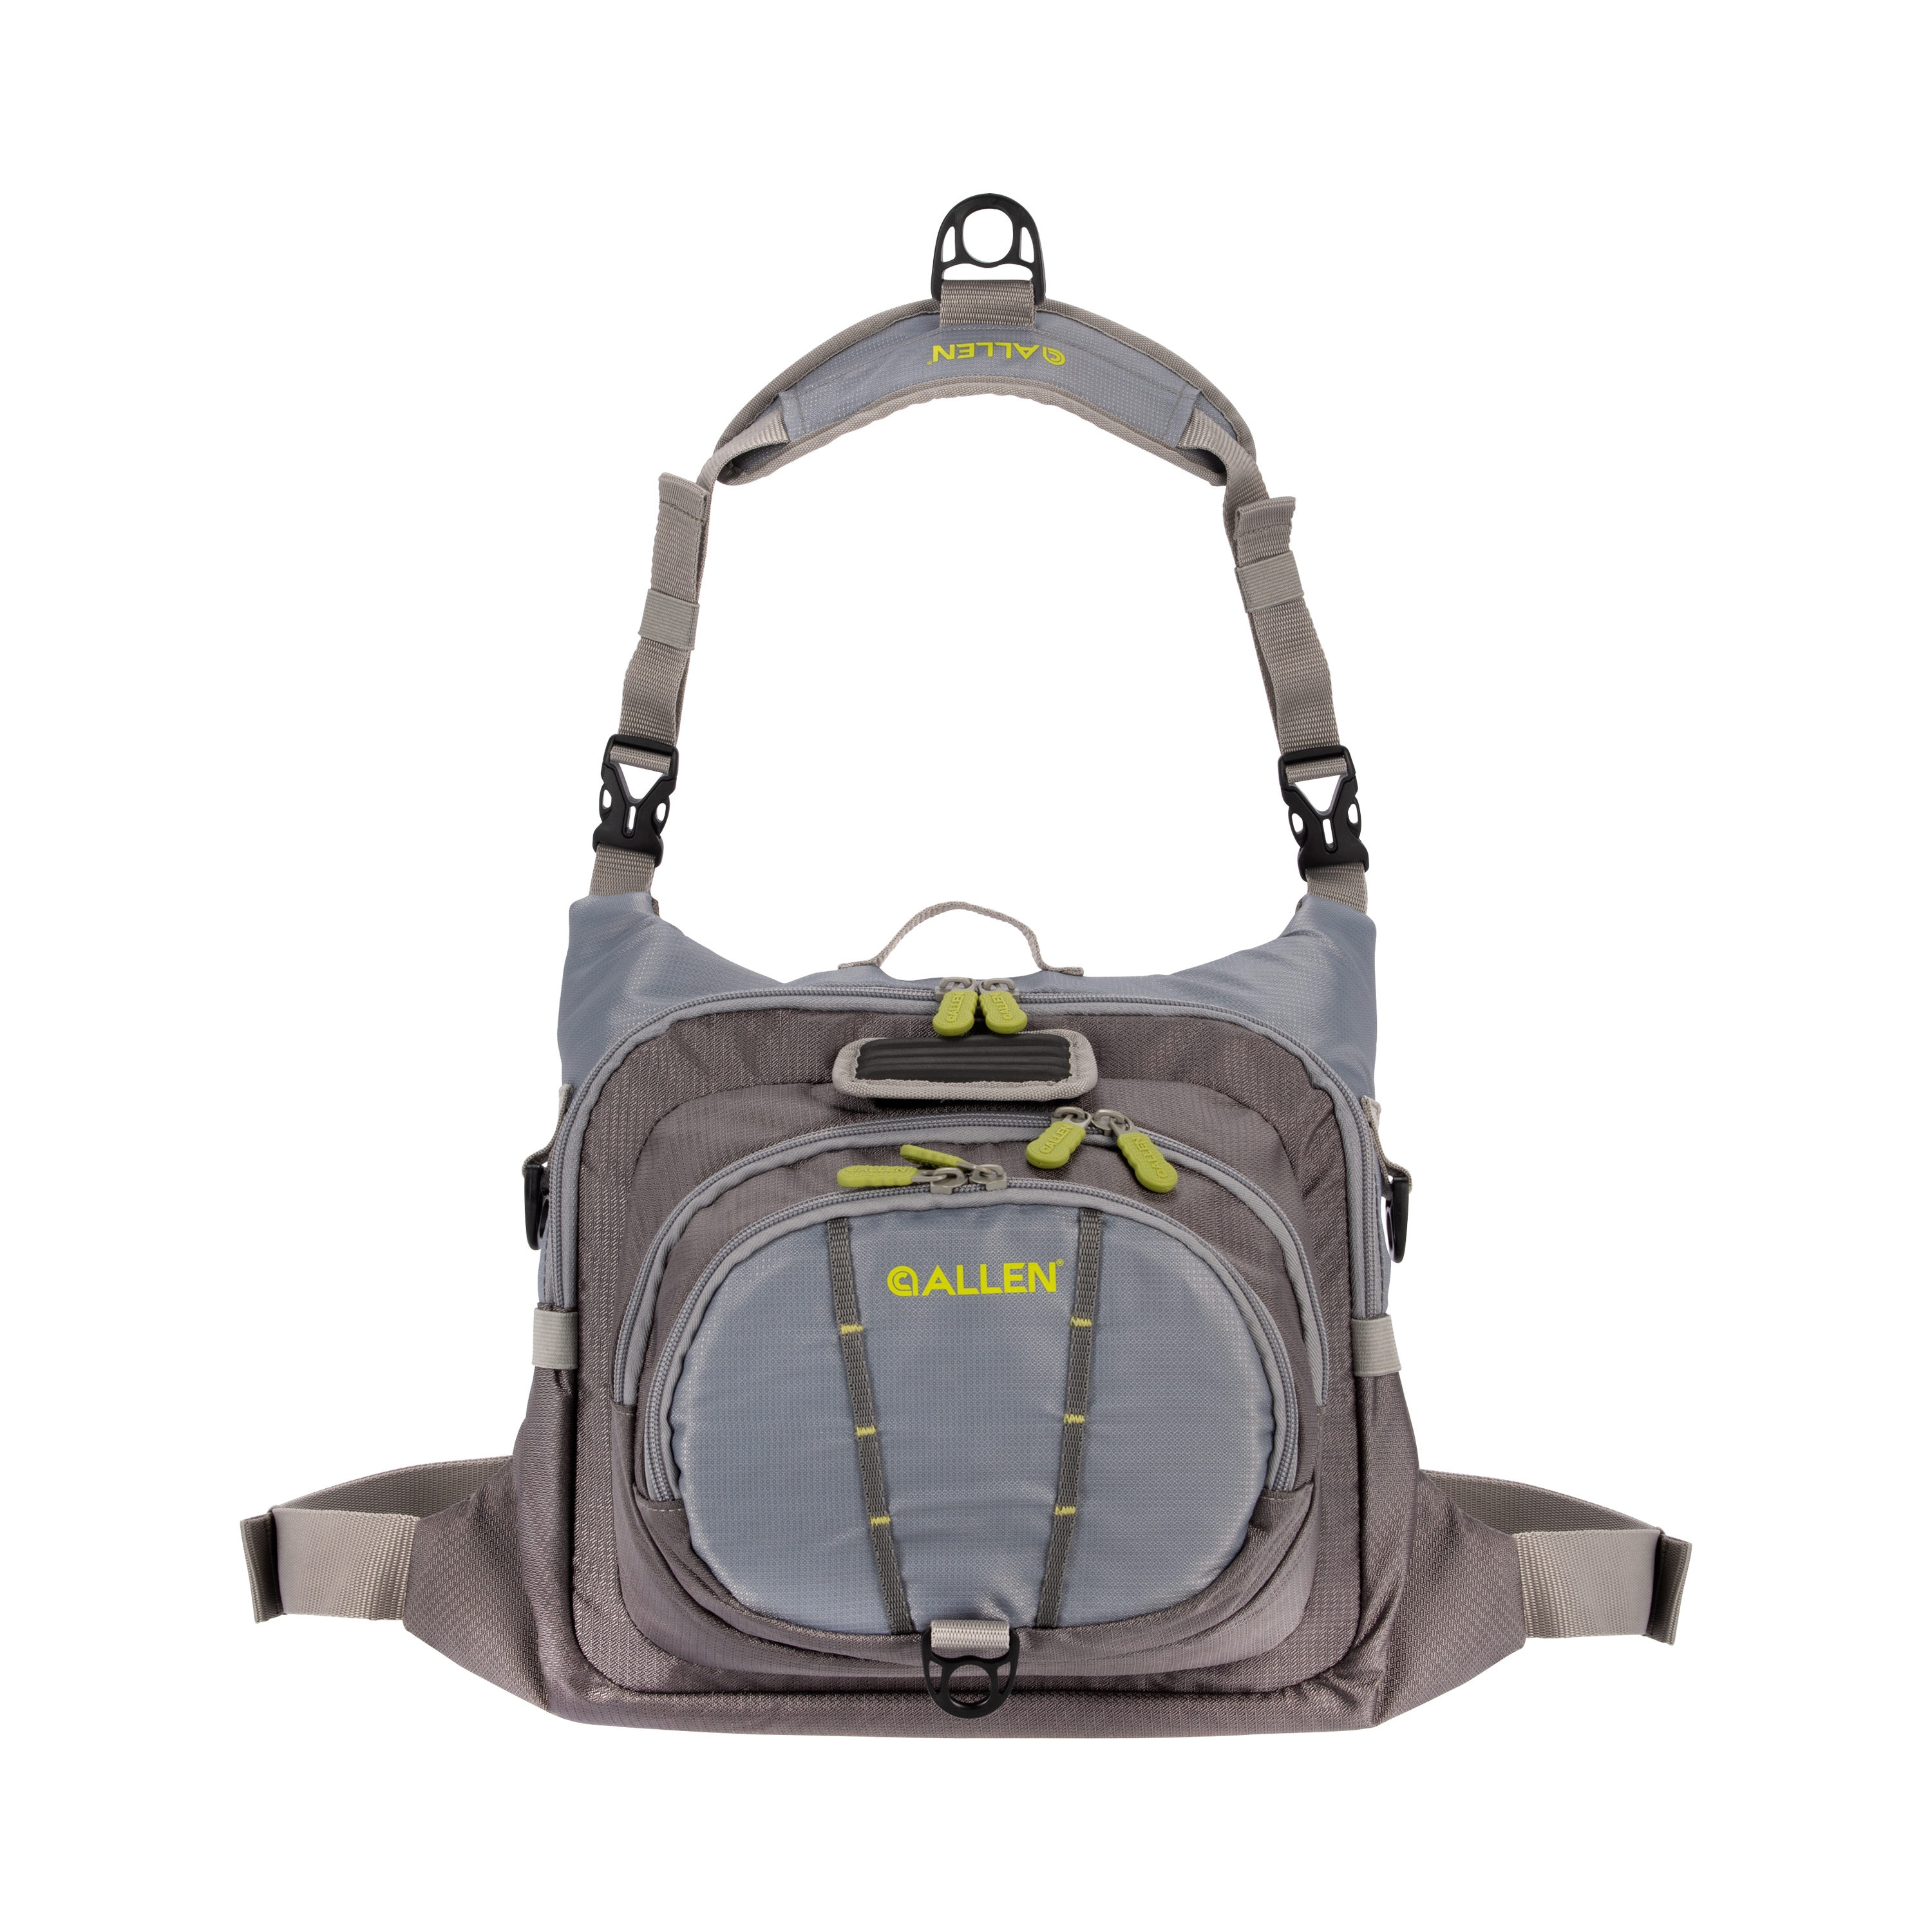 Allen Company Boulder Creek Gray Fishing Chest Pack - Fits 6